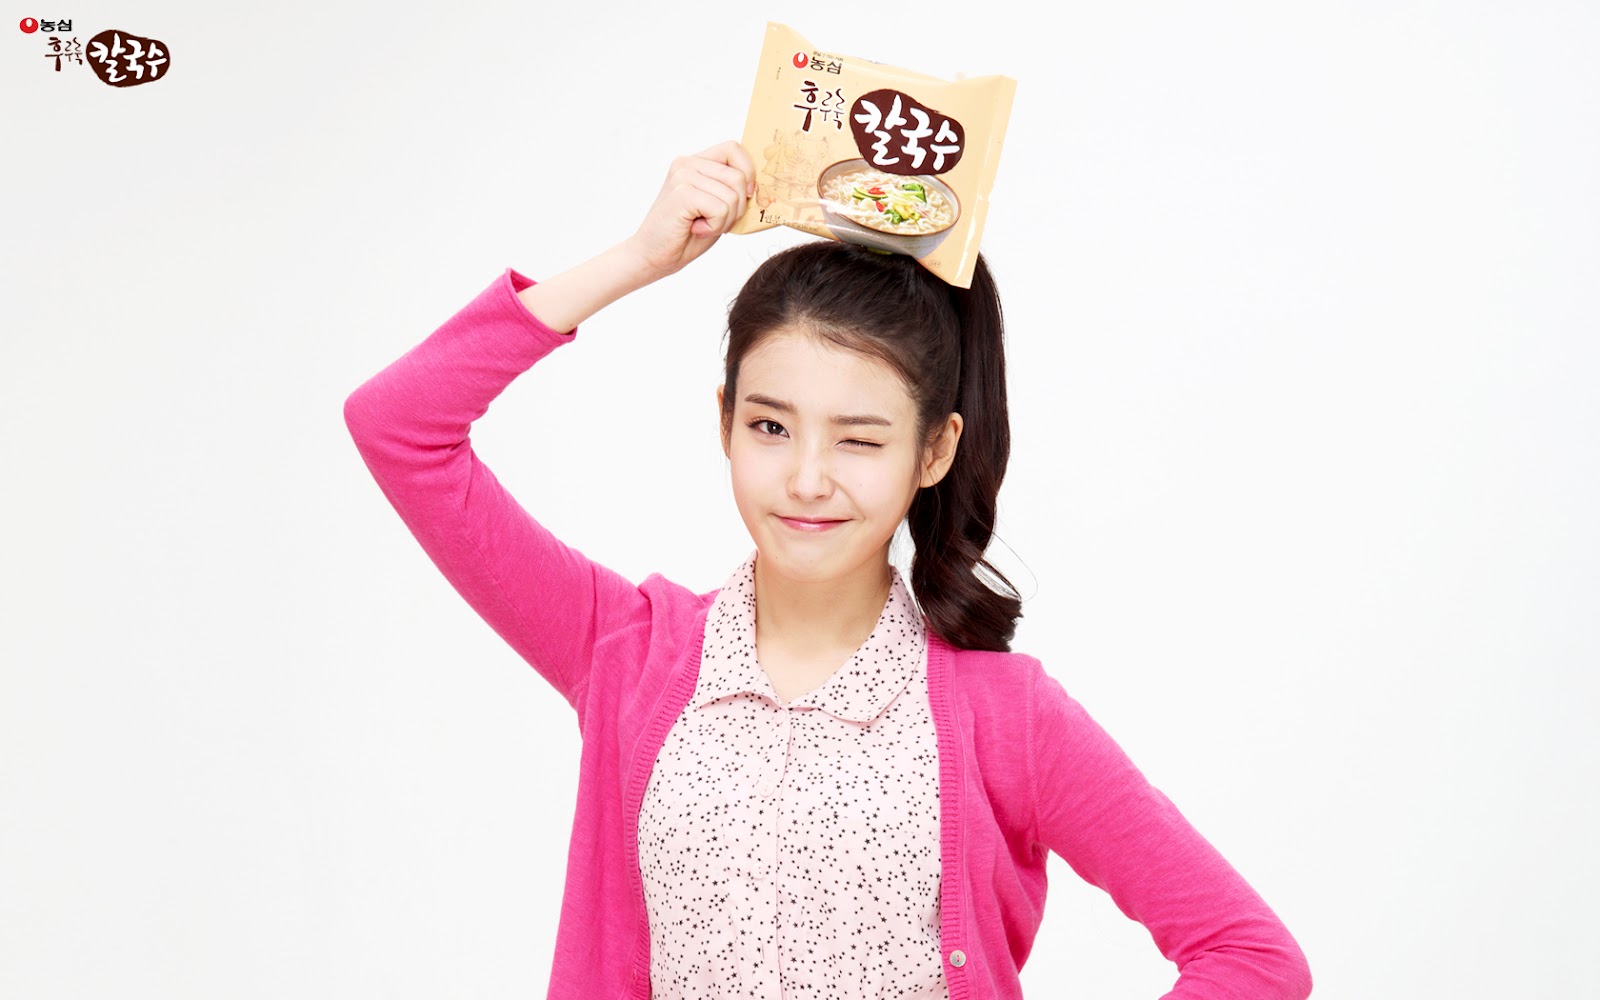 iu wallpaper iphone,forehead,pink,outerwear,neck,gesture